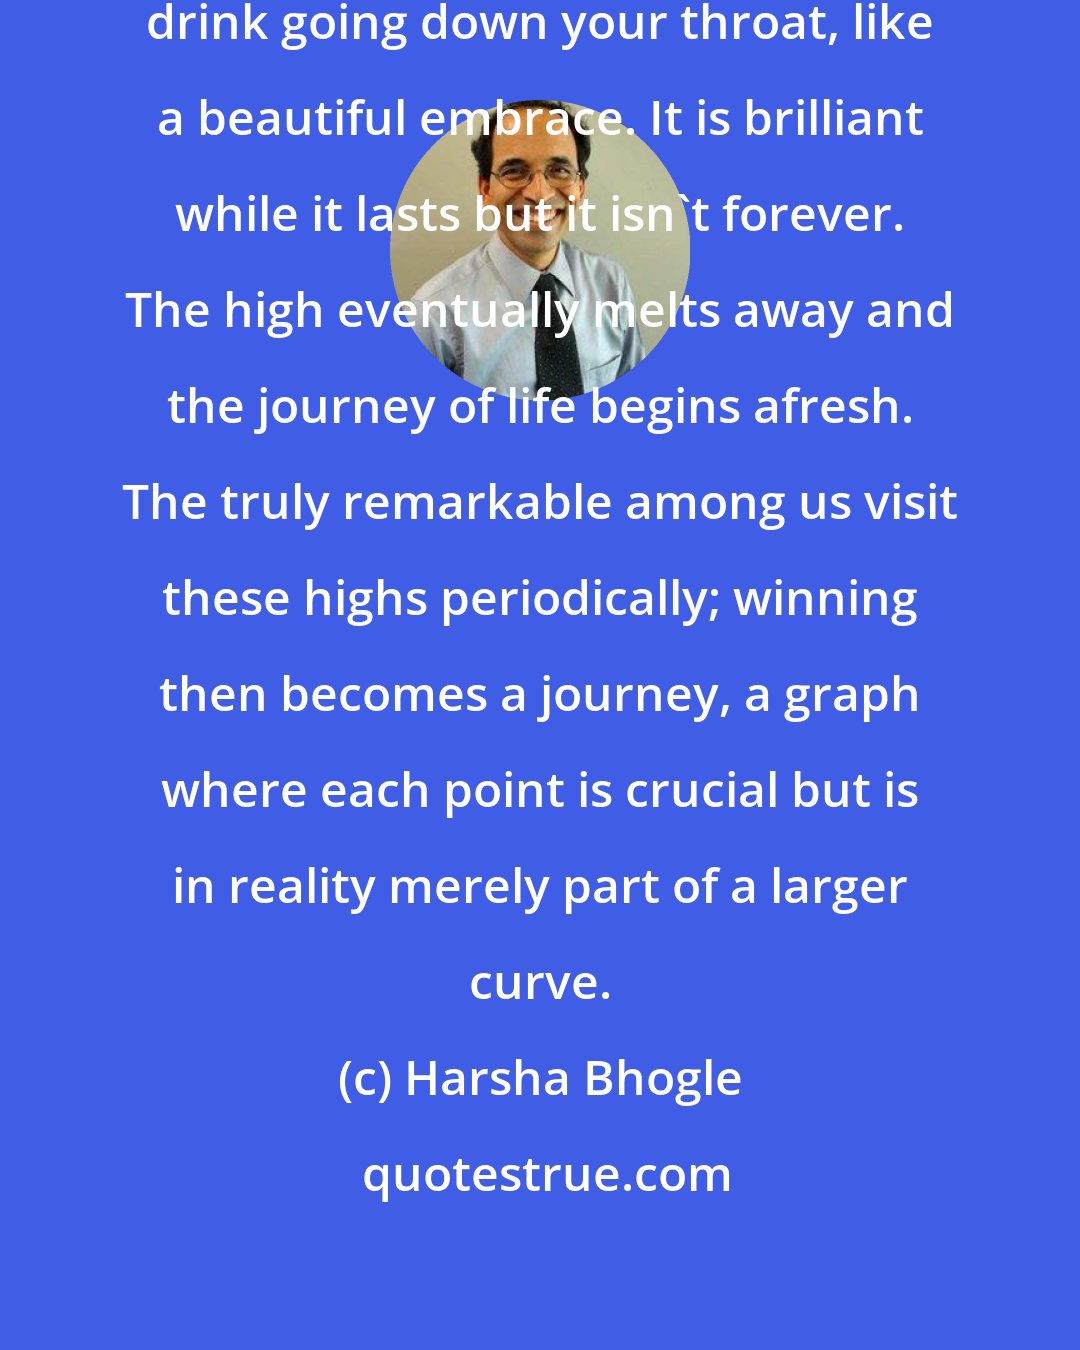 Harsha Bhogle: And yet, winning is like a welcome drink going down your throat, like a beautiful embrace. It is brilliant while it lasts but it isn't forever. The high eventually melts away and the journey of life begins afresh. The truly remarkable among us visit these highs periodically; winning then becomes a journey, a graph where each point is crucial but is in reality merely part of a larger curve.